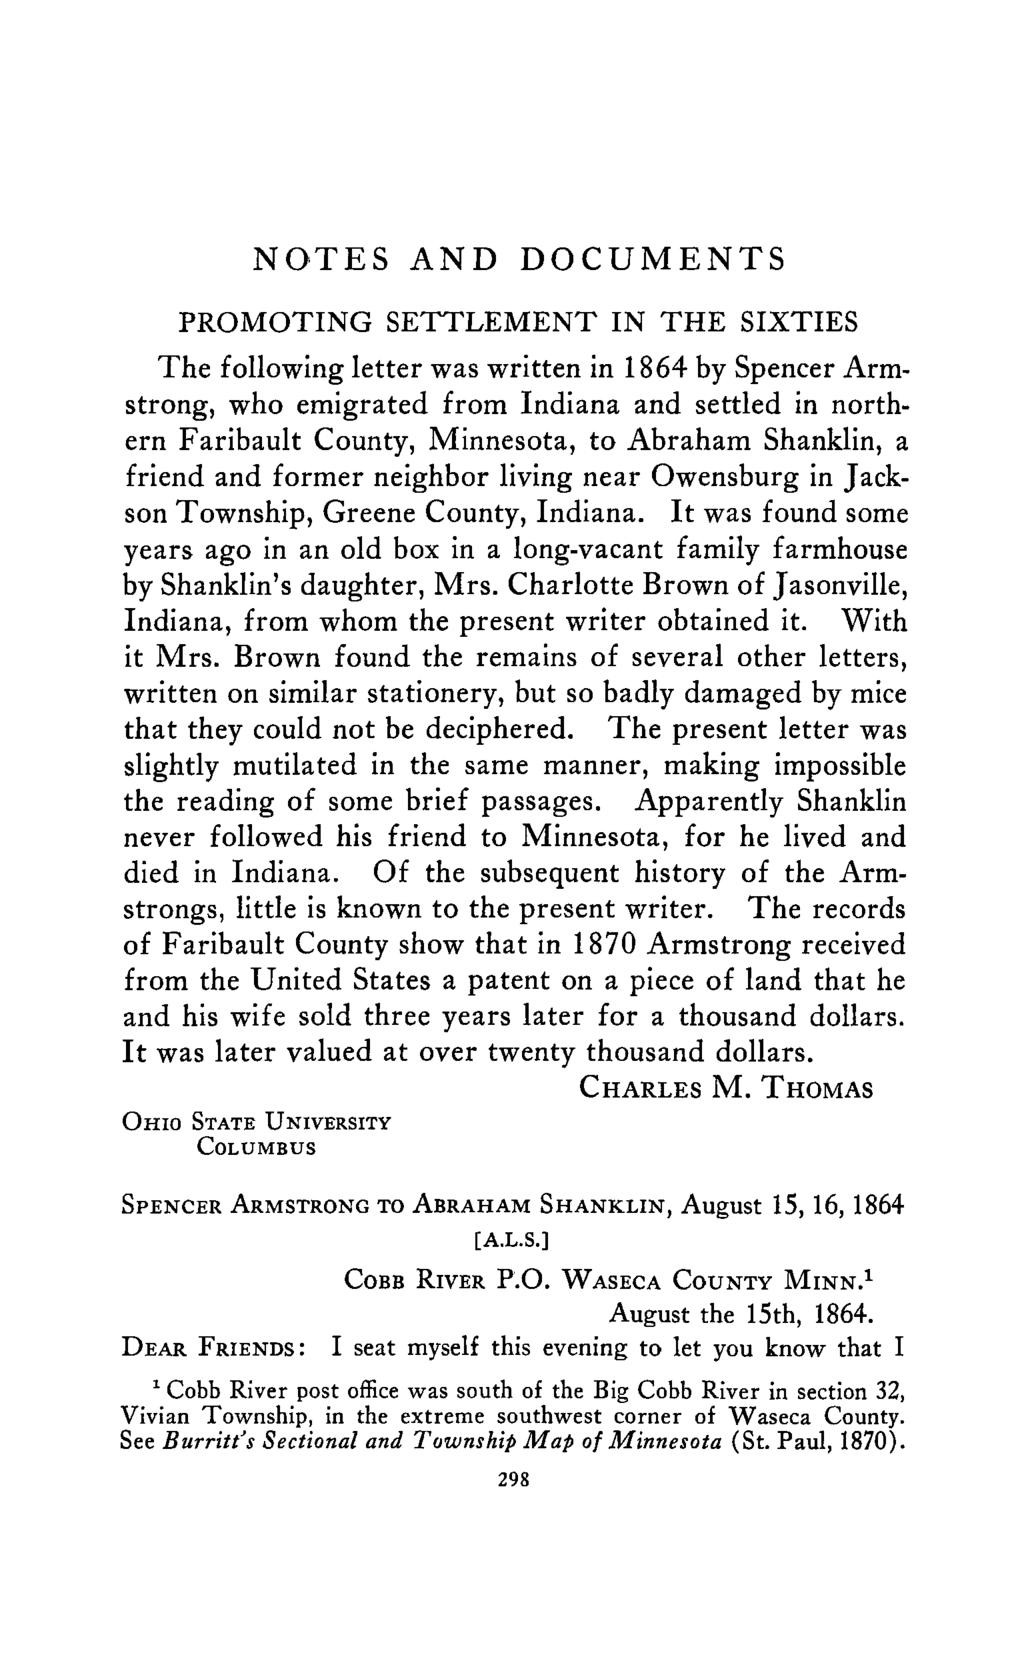 NOTES AND DOCUMENTS PROMOTING SETTLEMENT IN THE SIXTIES The following letter was written In 1864 by Spencer Armstrong, who emigrated from Indiana and settled In northern Faribault County, Minnesota,